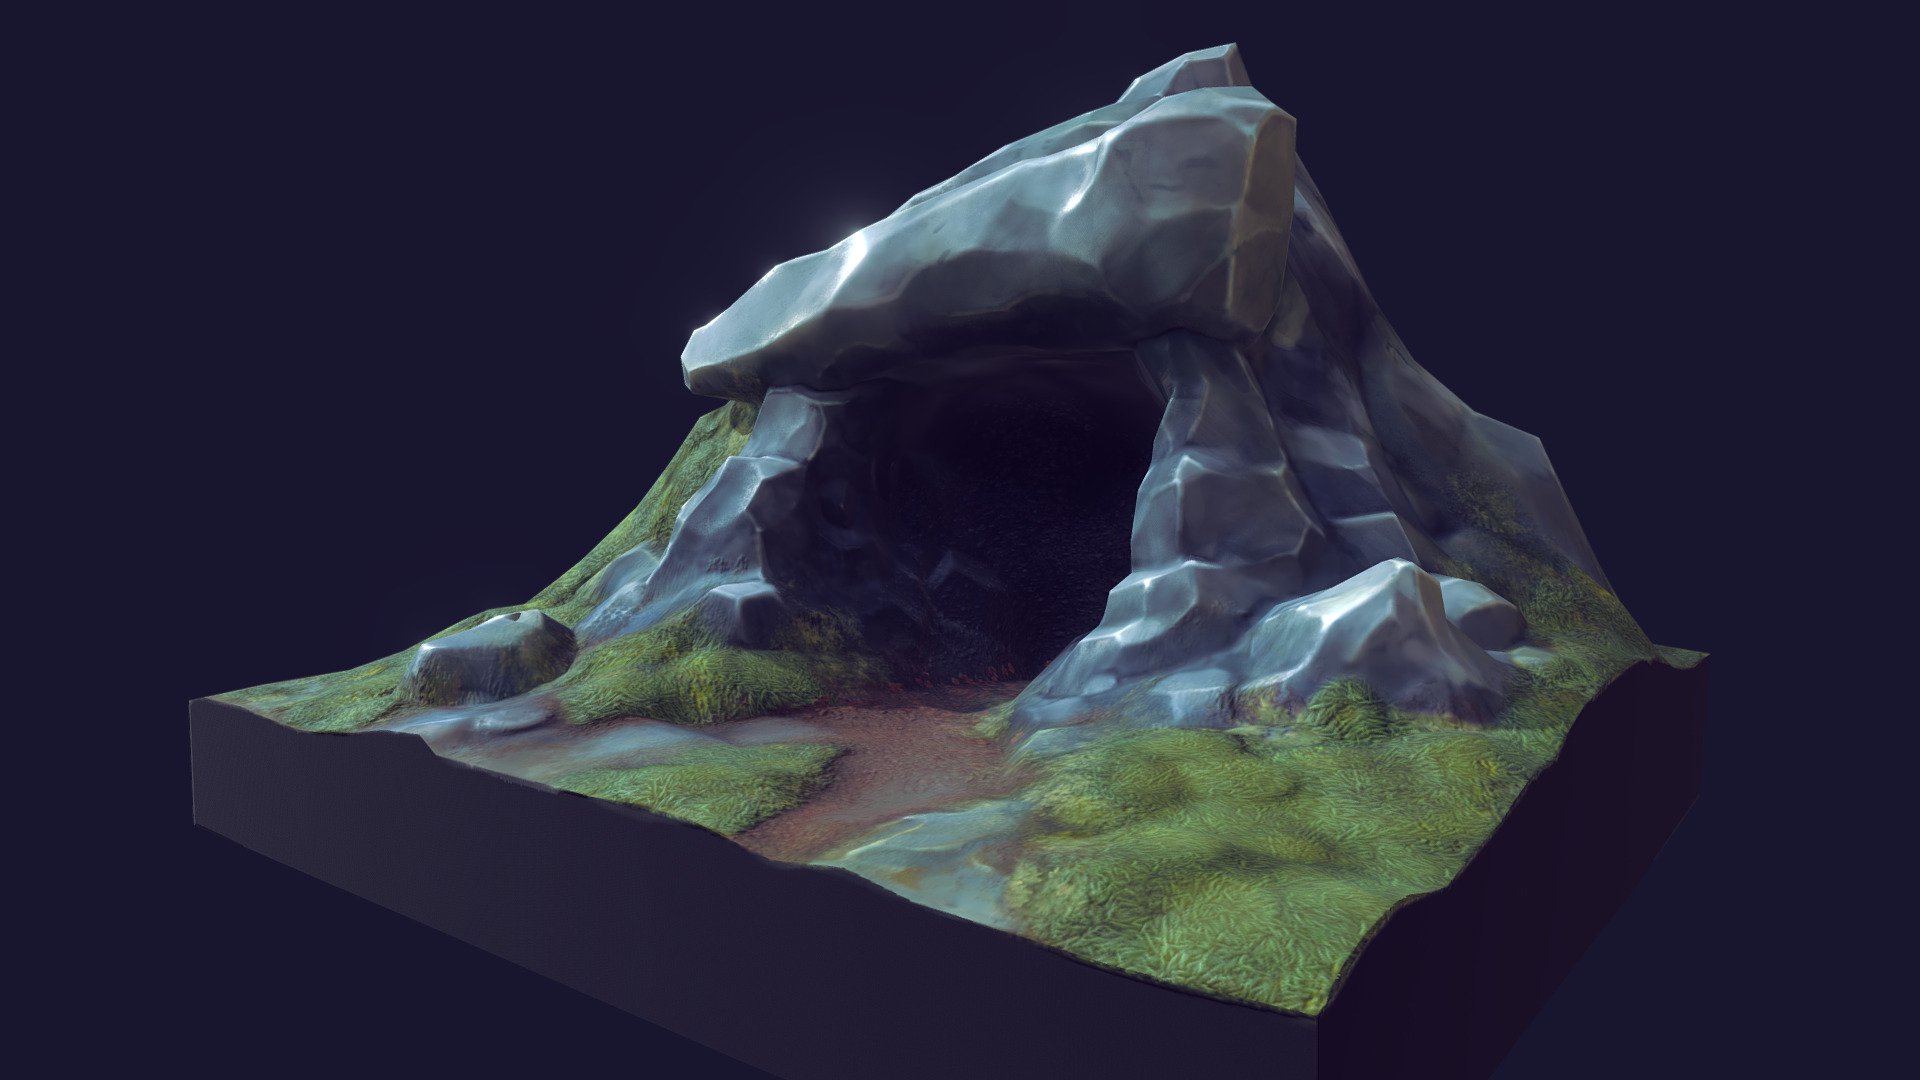 Made a model in zbrush and painted in 3d Coat to warm up - Cave in forest - 3D model by farart 3d model